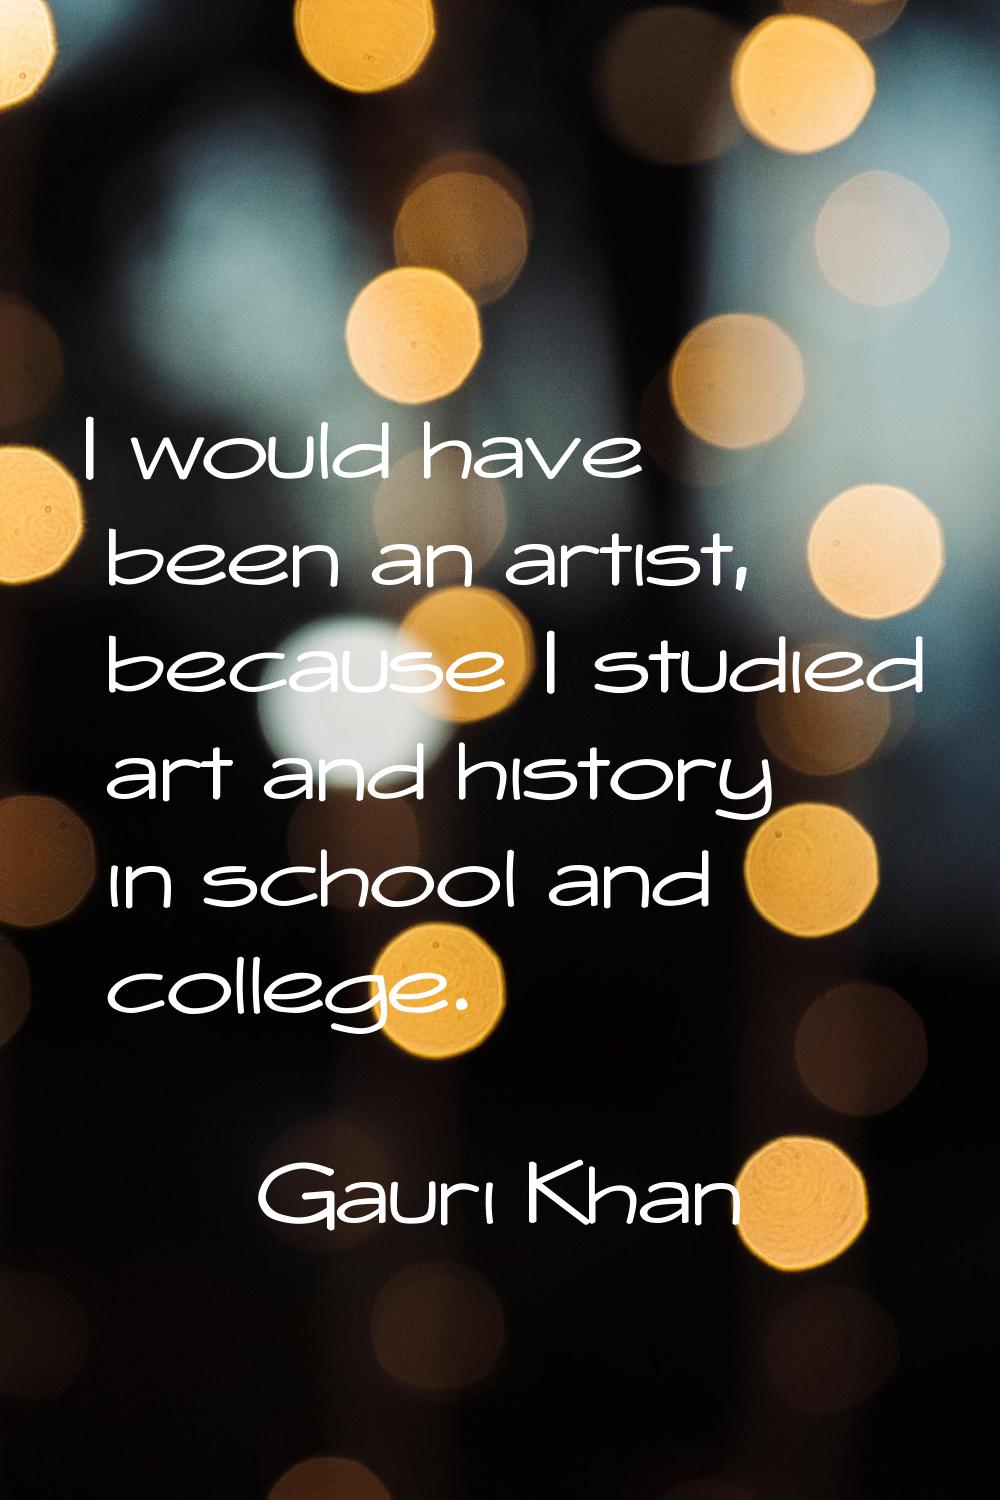 I would have been an artist, because I studied art and history in school and college.